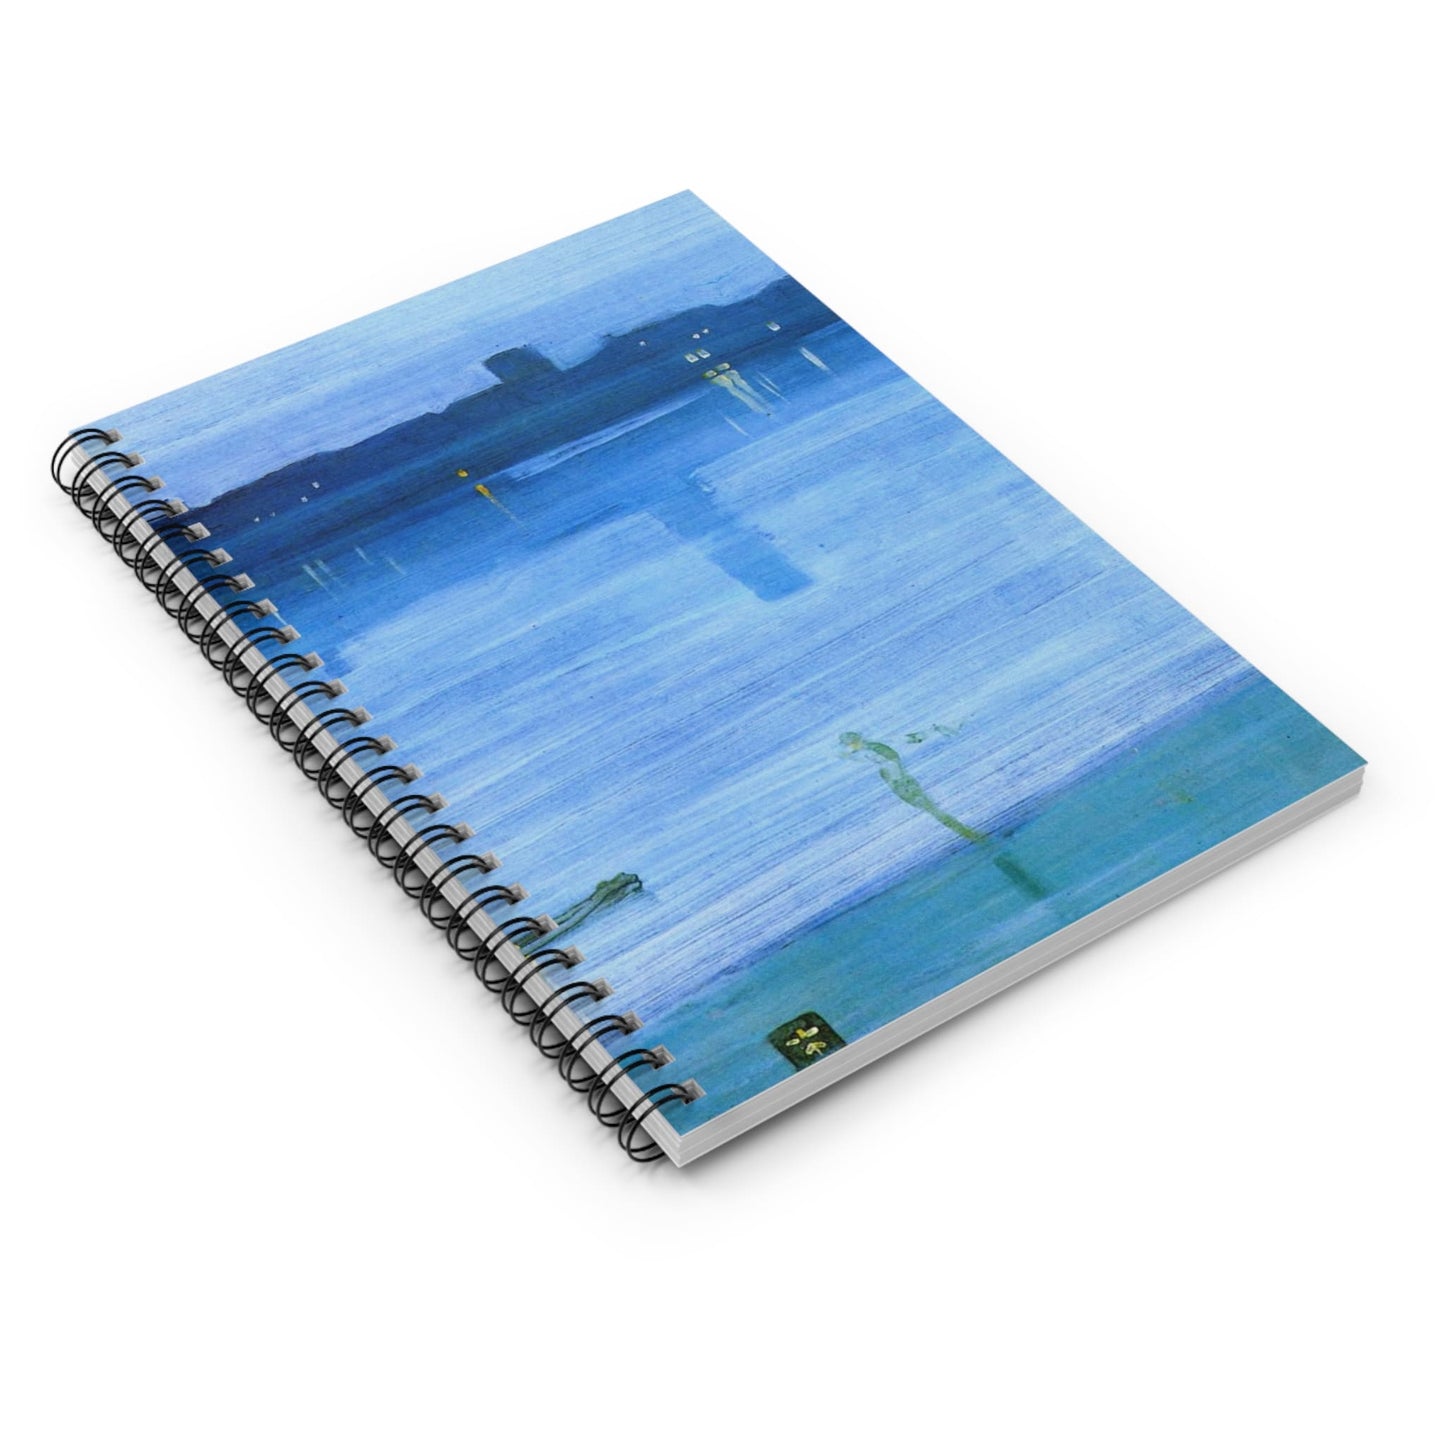 Light Blue Abstract Spiral Notebook Laying Flat on White Surface